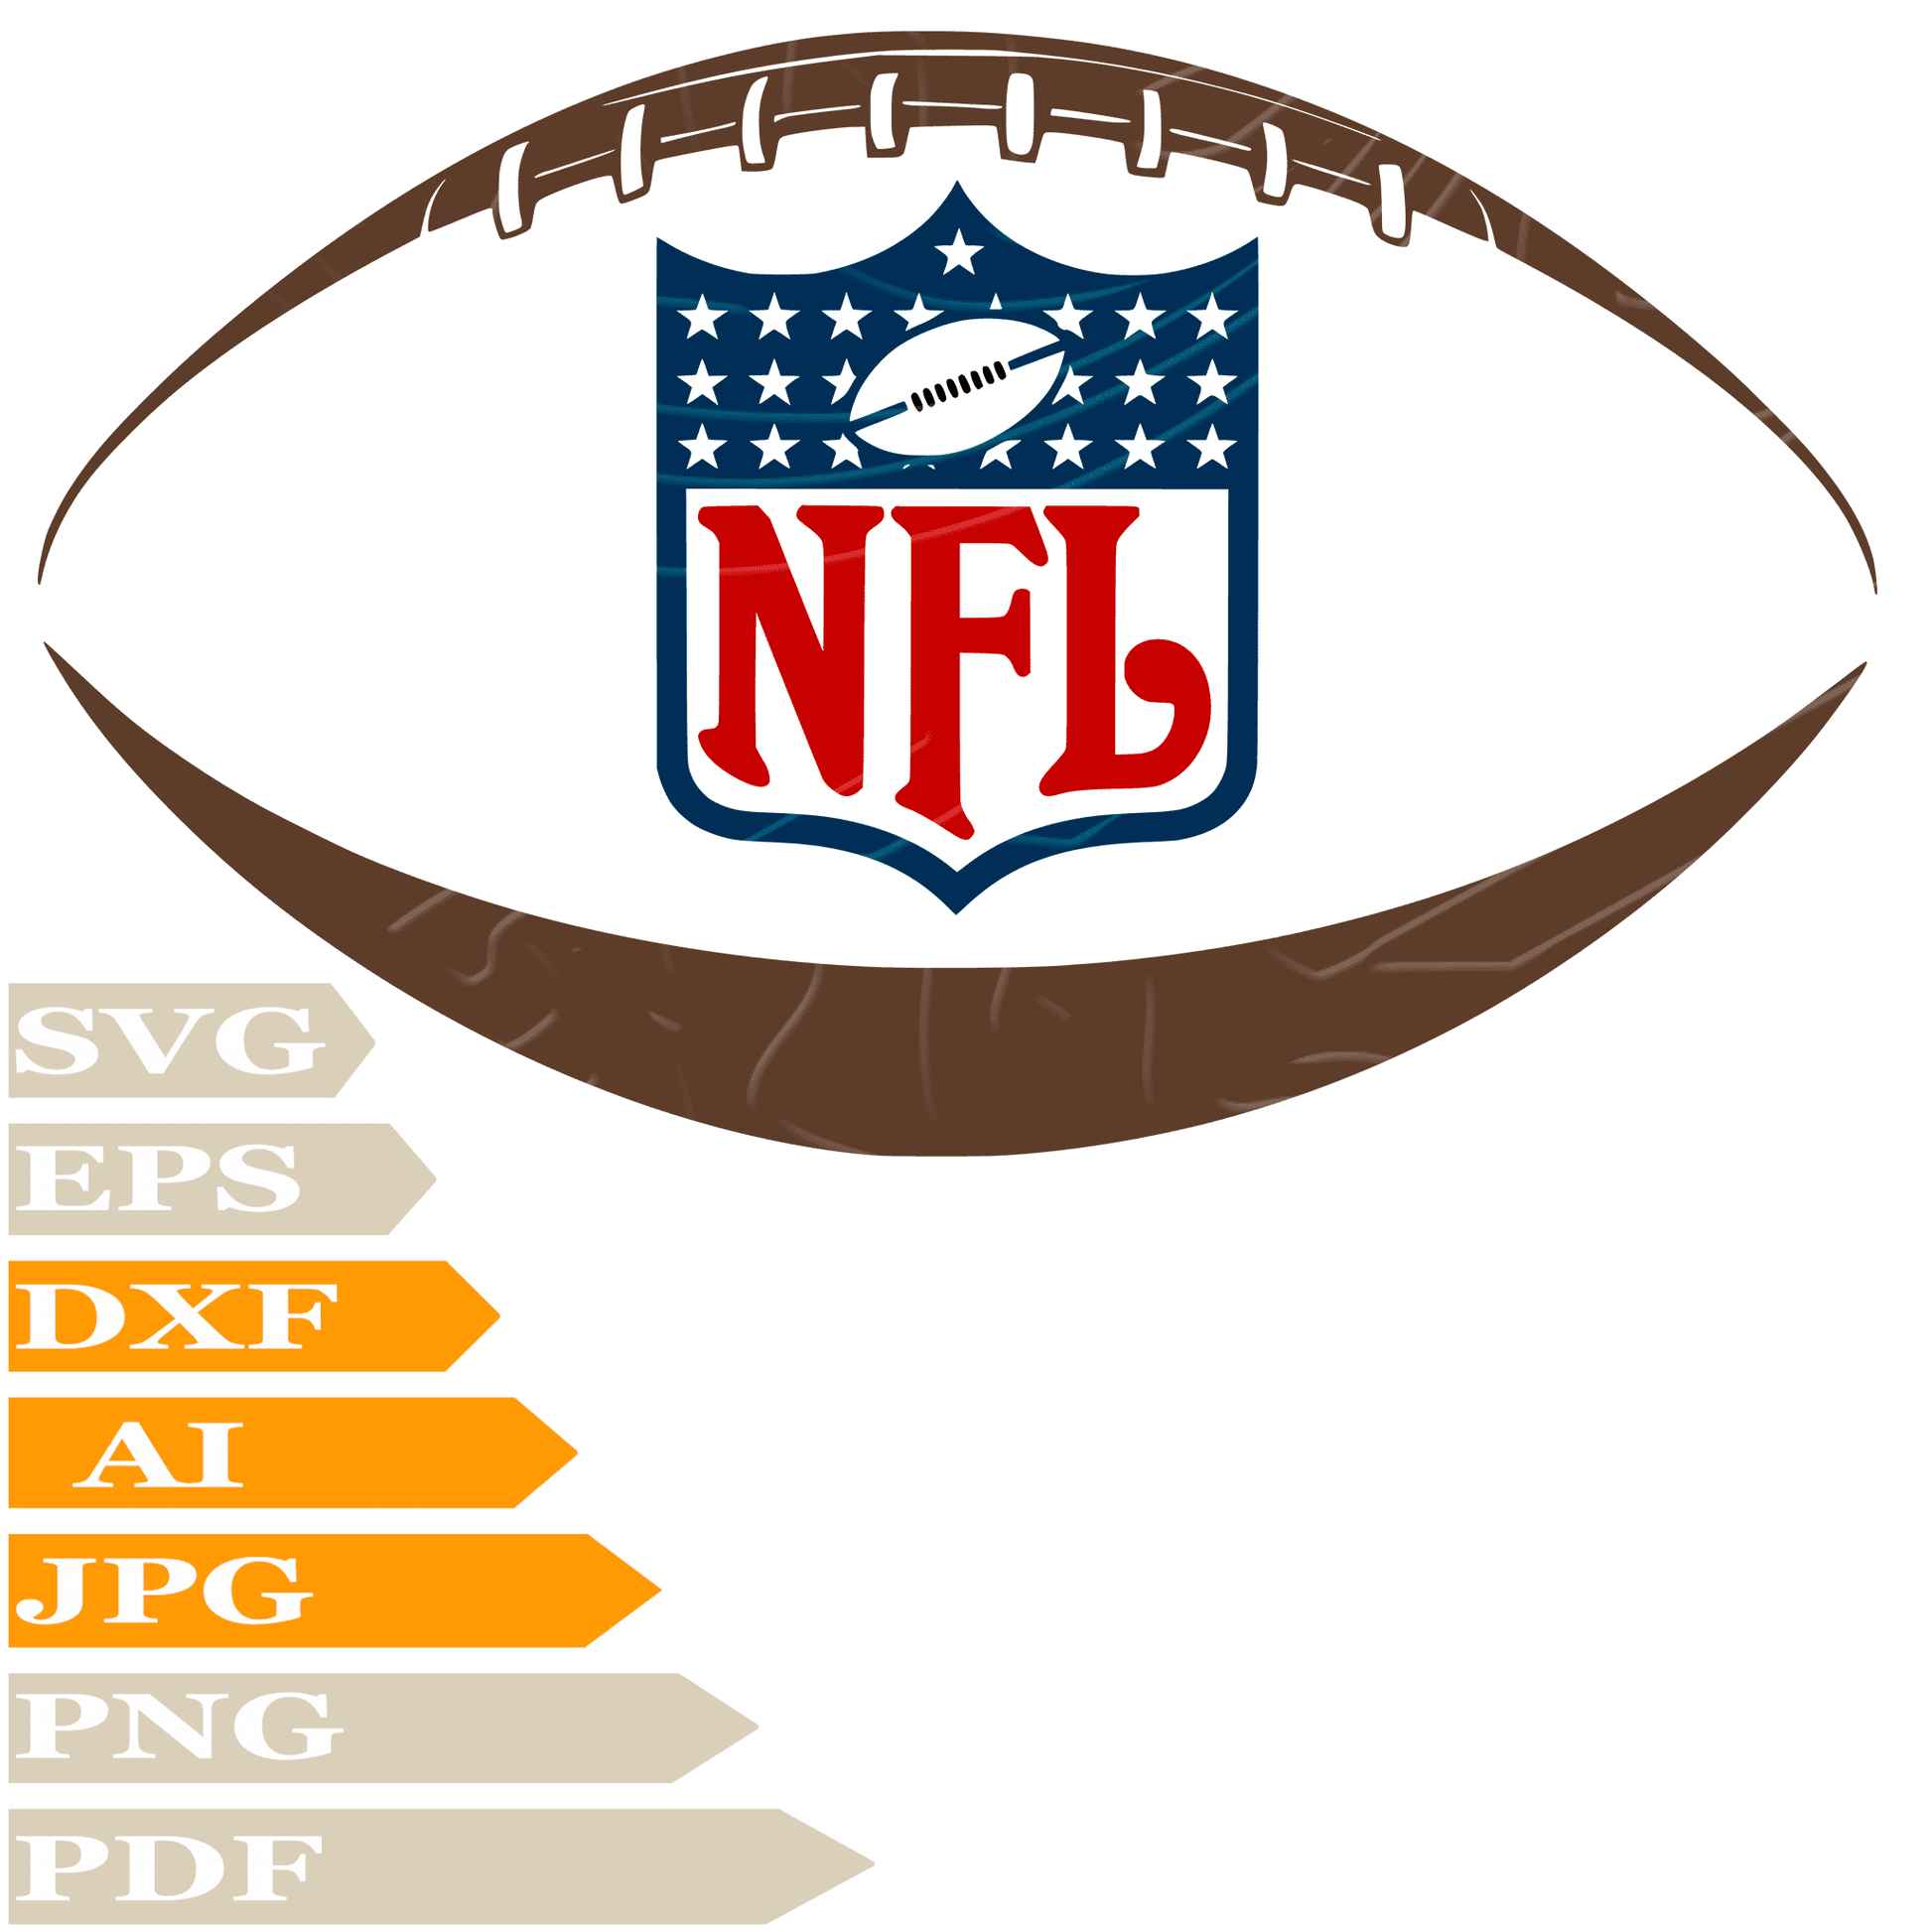 American Football SVG File, National Football League NFL Logo SVG Design, NFL Vector Graphics, NFL Logo PNG, Cricut, Image Cut, Clipart,  For Tattoo, Cut File, Silhouette